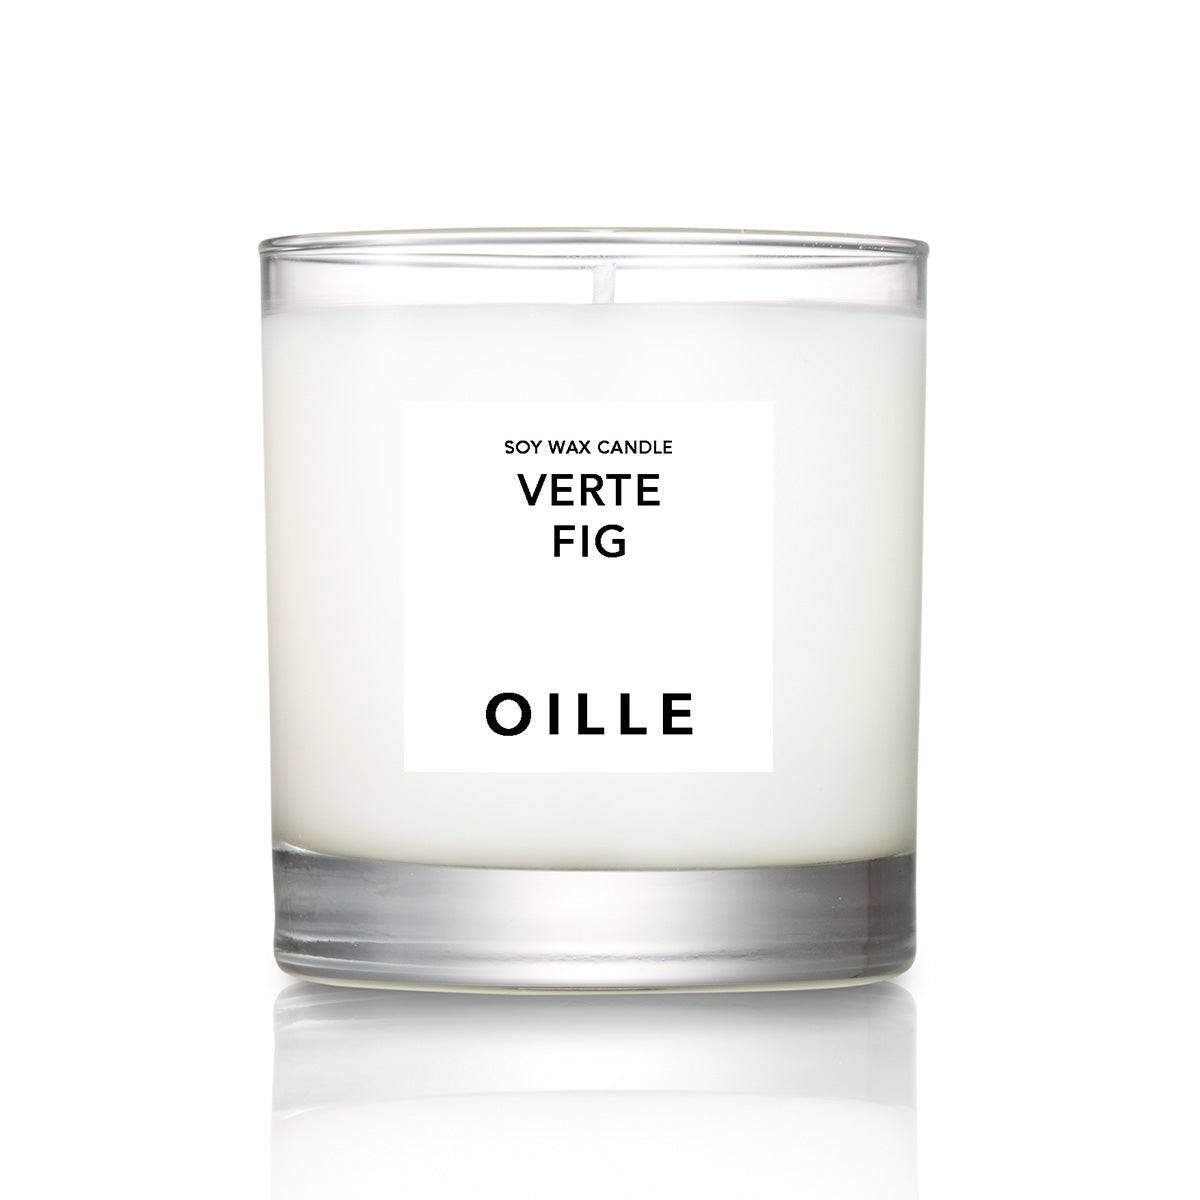 VERTE FIG SOY CANDLE